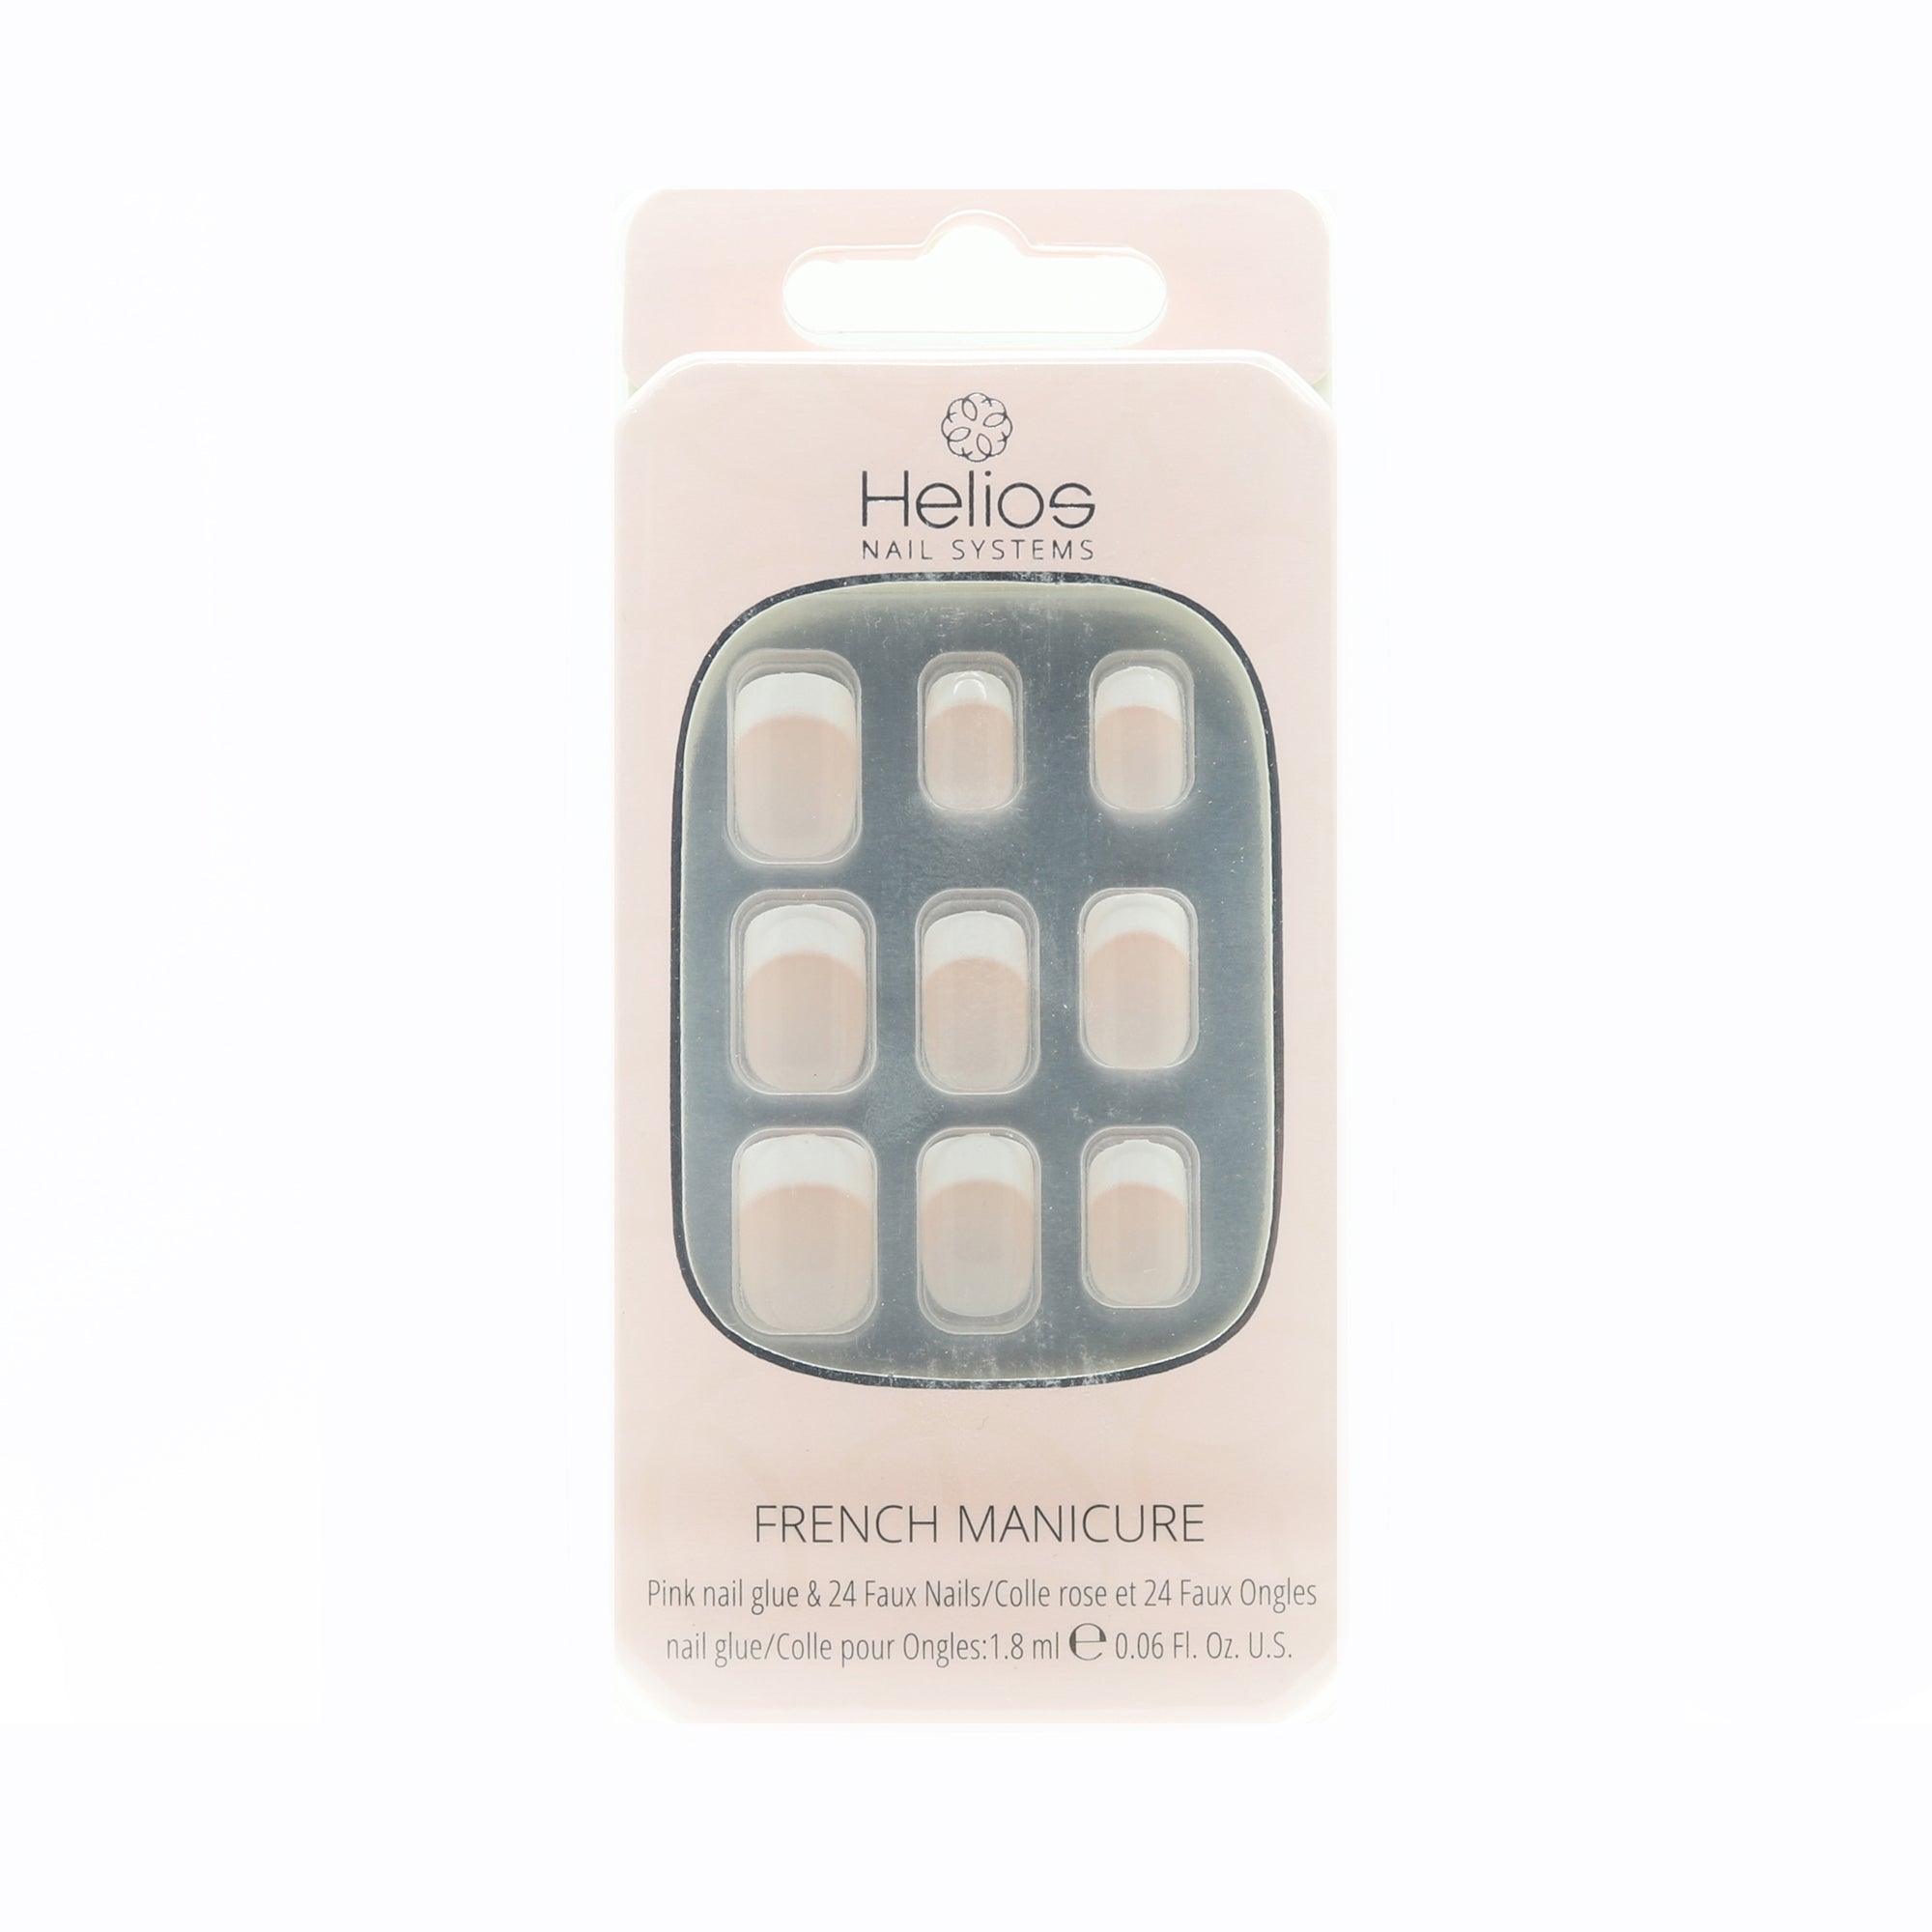 FRENCH MANICURE OVAL - Helios Nail Systems